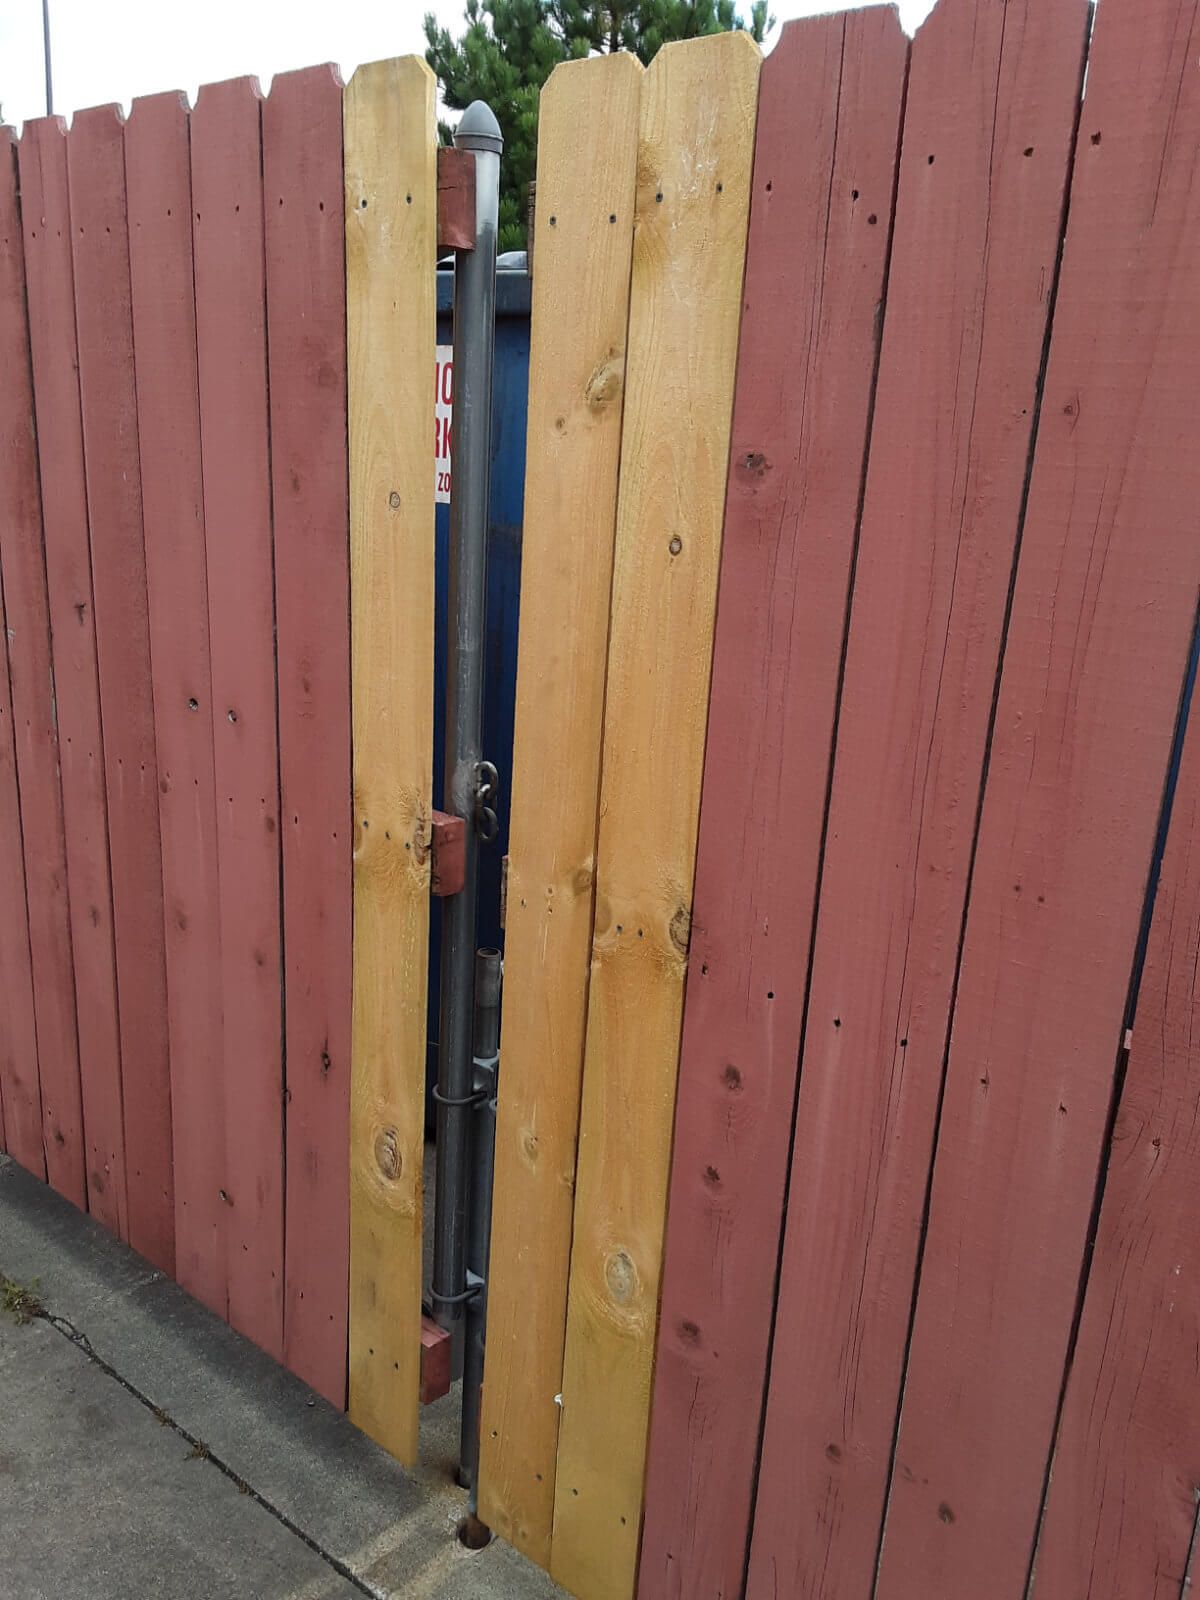 Fence Repair in Toledo Ohio by Dublin Commercial Property Services, Inc.